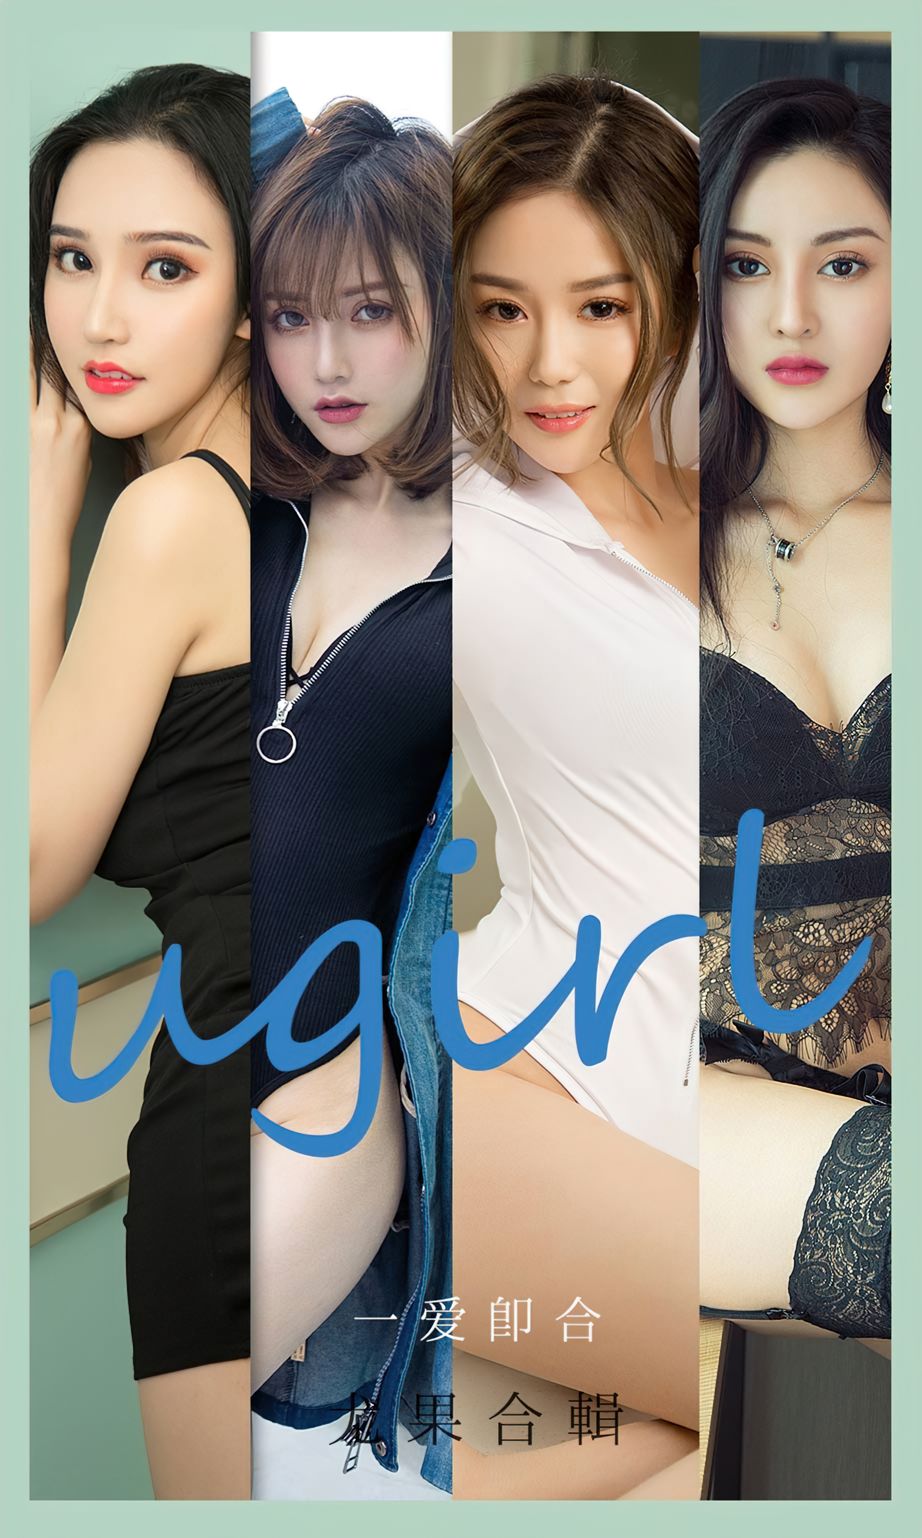 Ugirls App Vol. 2145 Fit in easily with